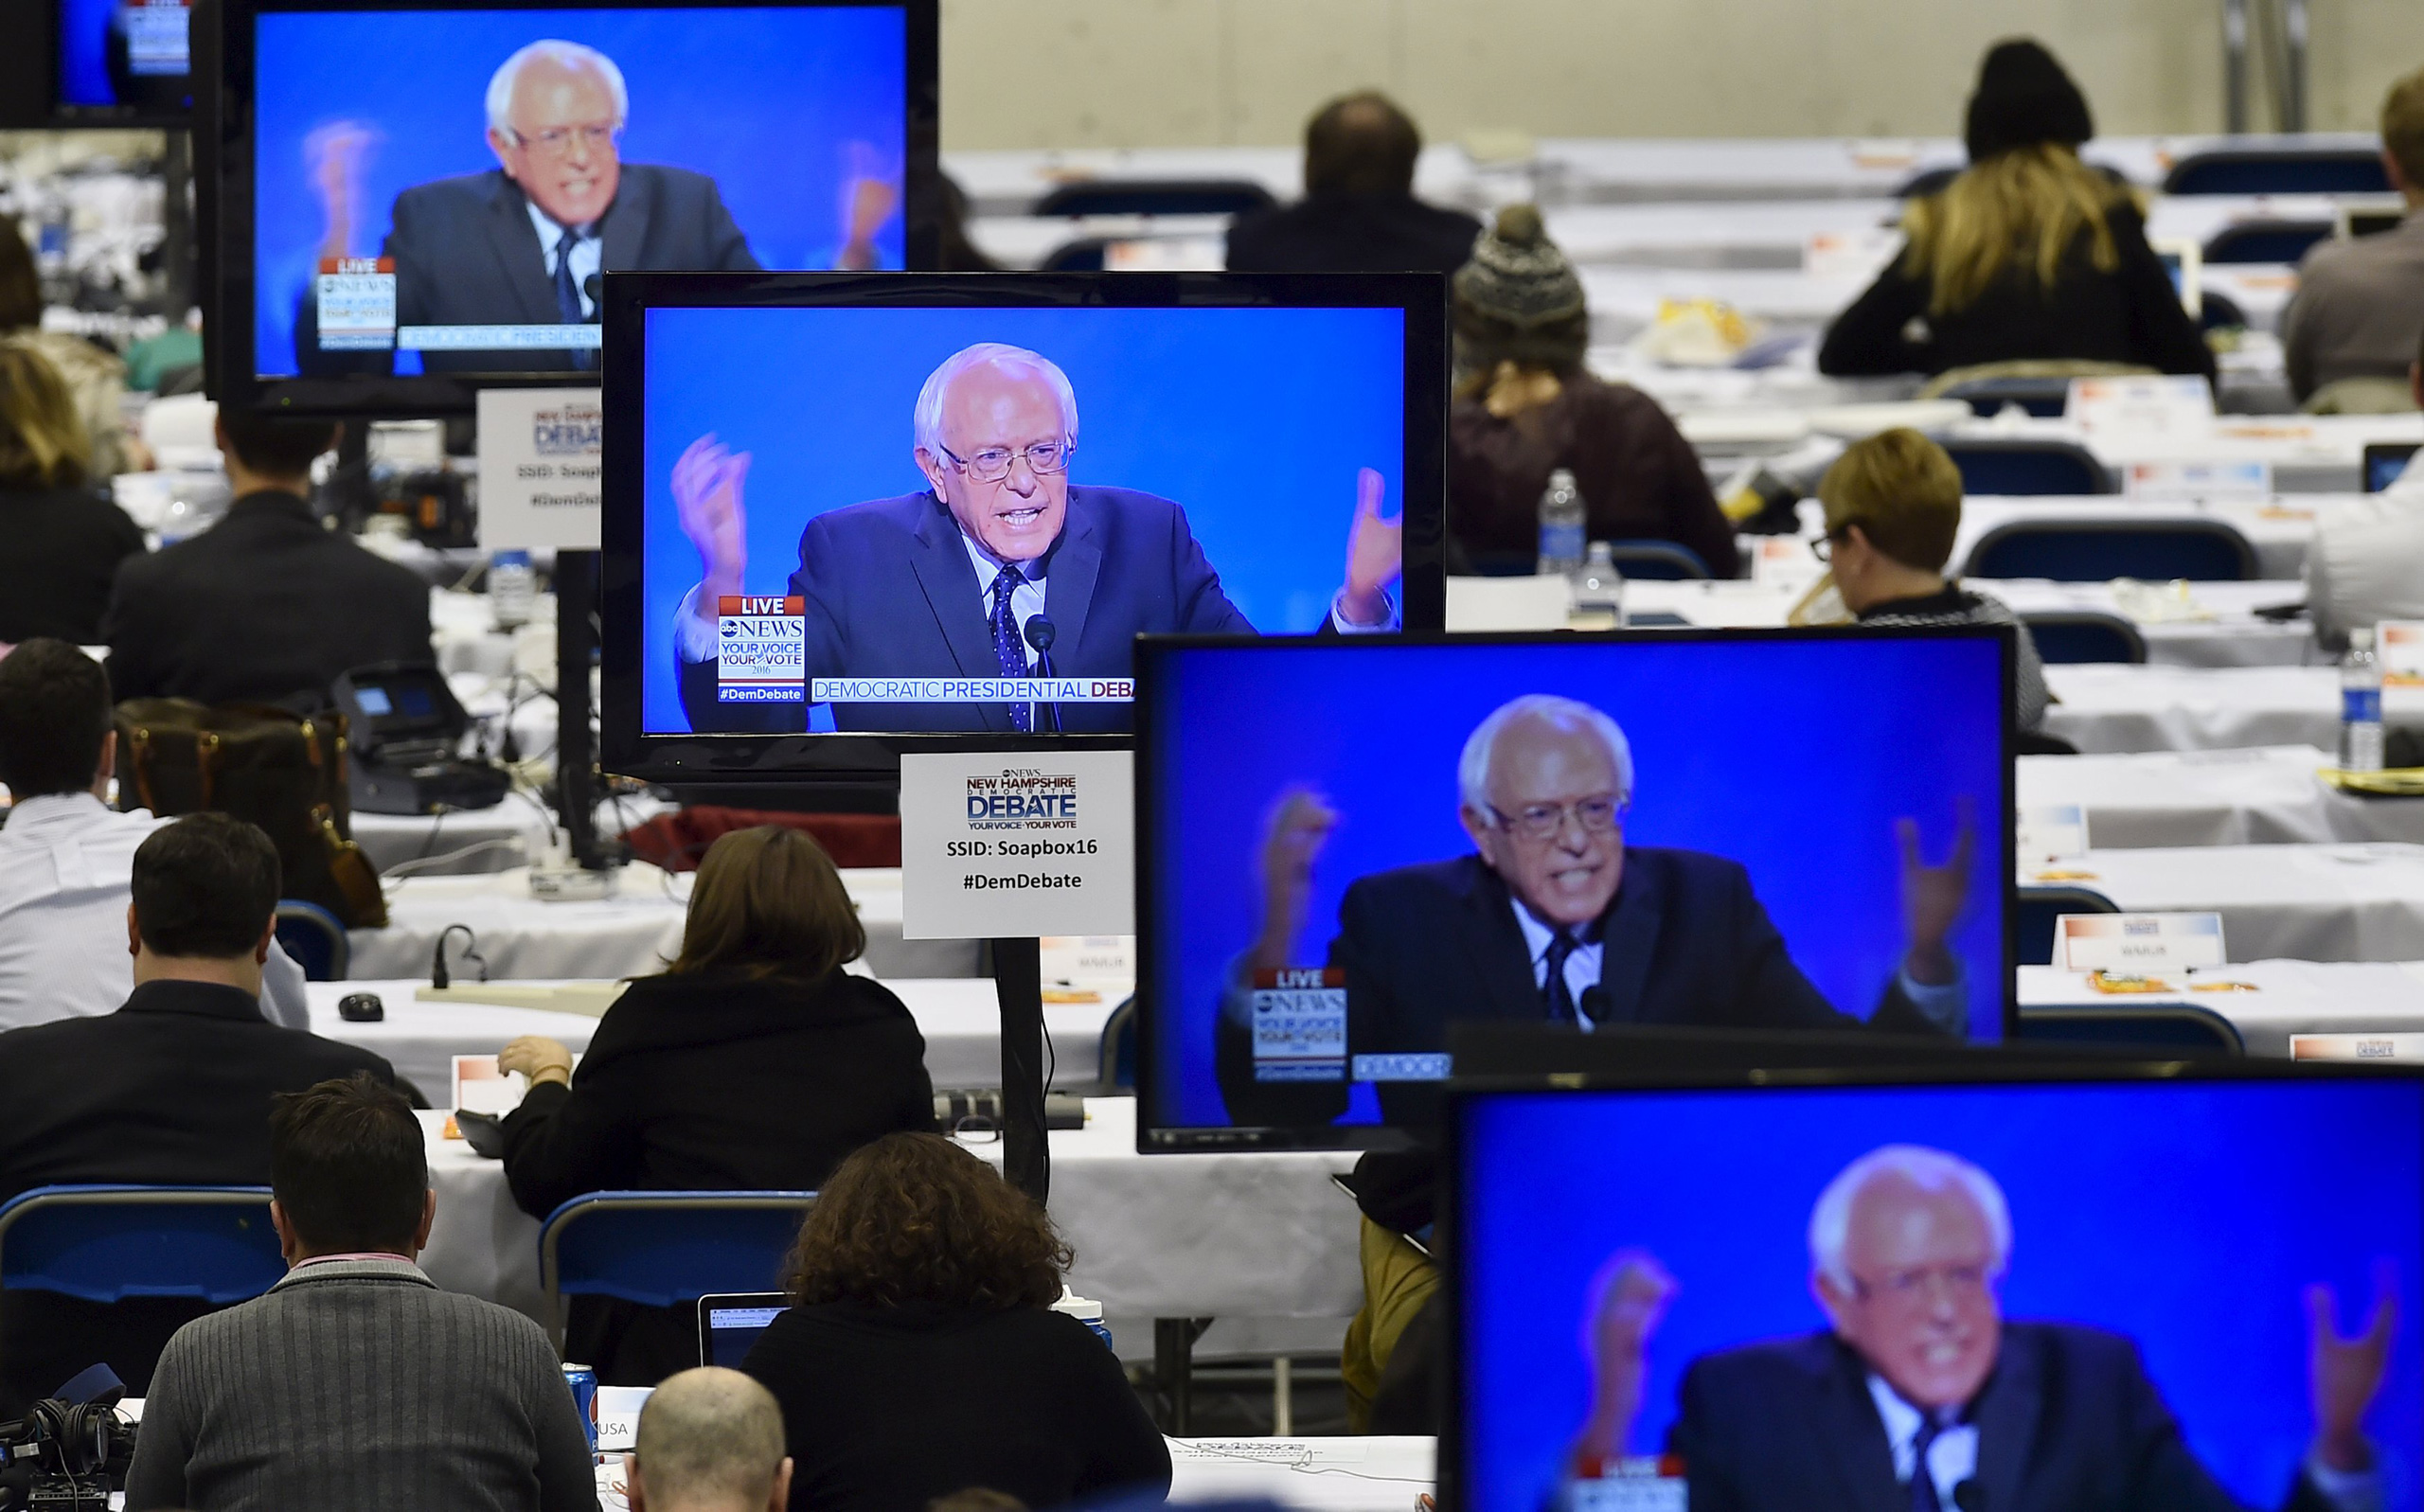 Bernie Sanders appears on television screens in the media work-room during the Democratic presidential candidates debate at Saint Anselm College in Manchester, N.H., on Dec. 19, 2015. (Gretchen Ertl —Reuters)